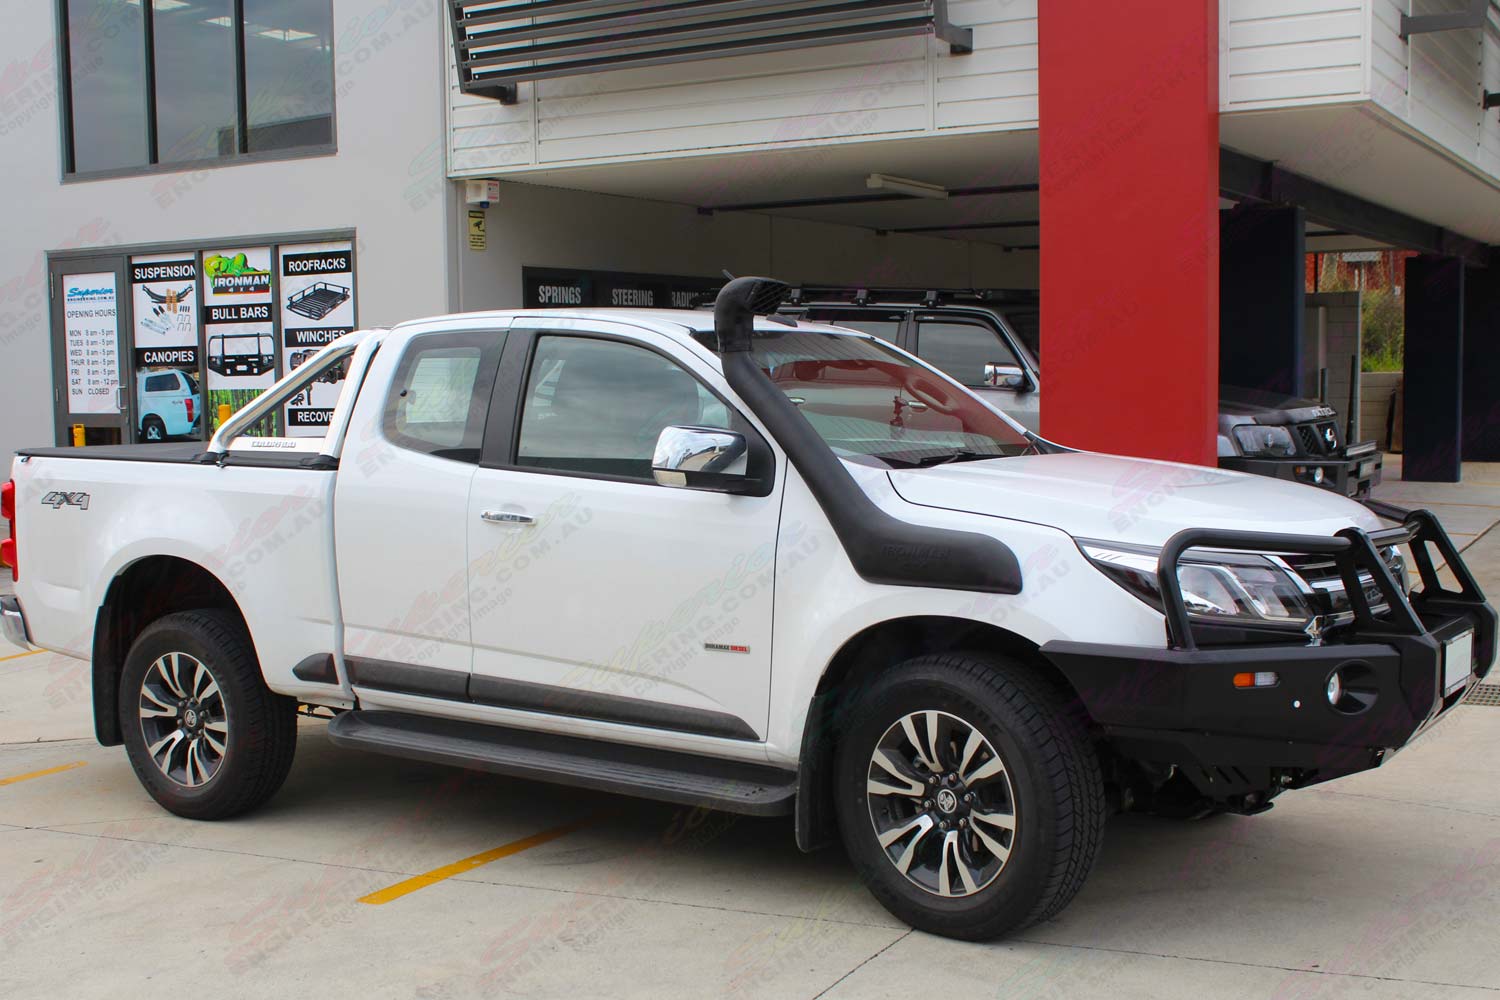 Right side view of a Holden Colorado Space Cab fitted with a new Ironman 4x4 Bullbar and Airforce Snorkel